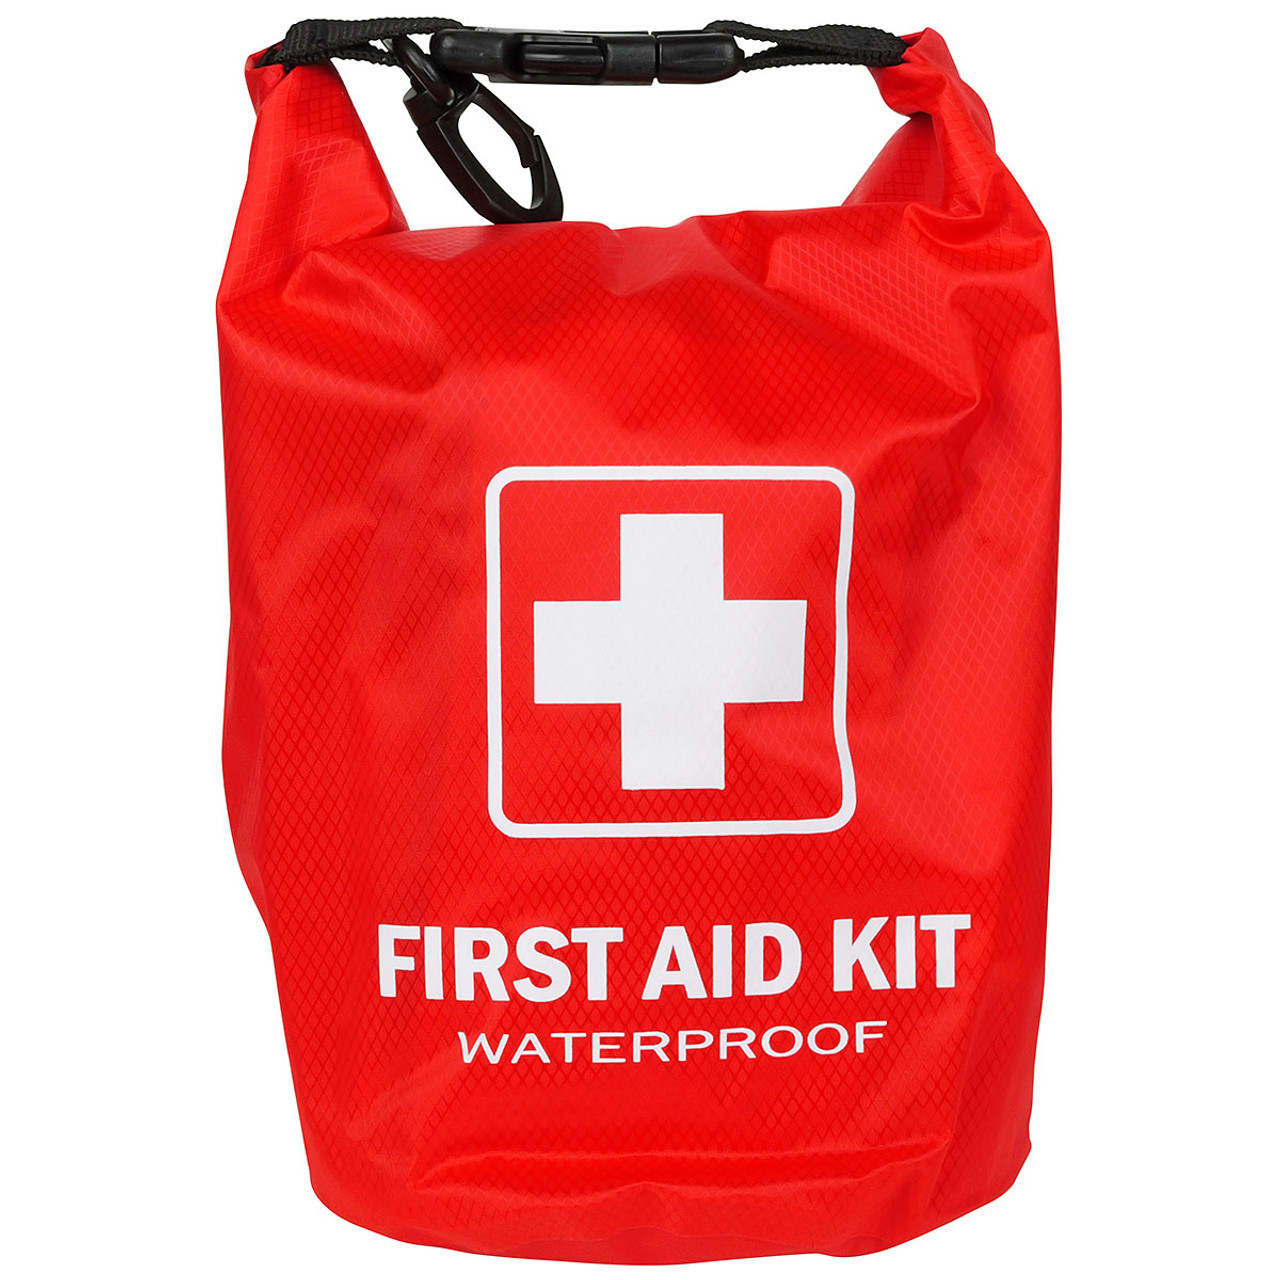 First Aid Kit: What to Include, Where to Keep It